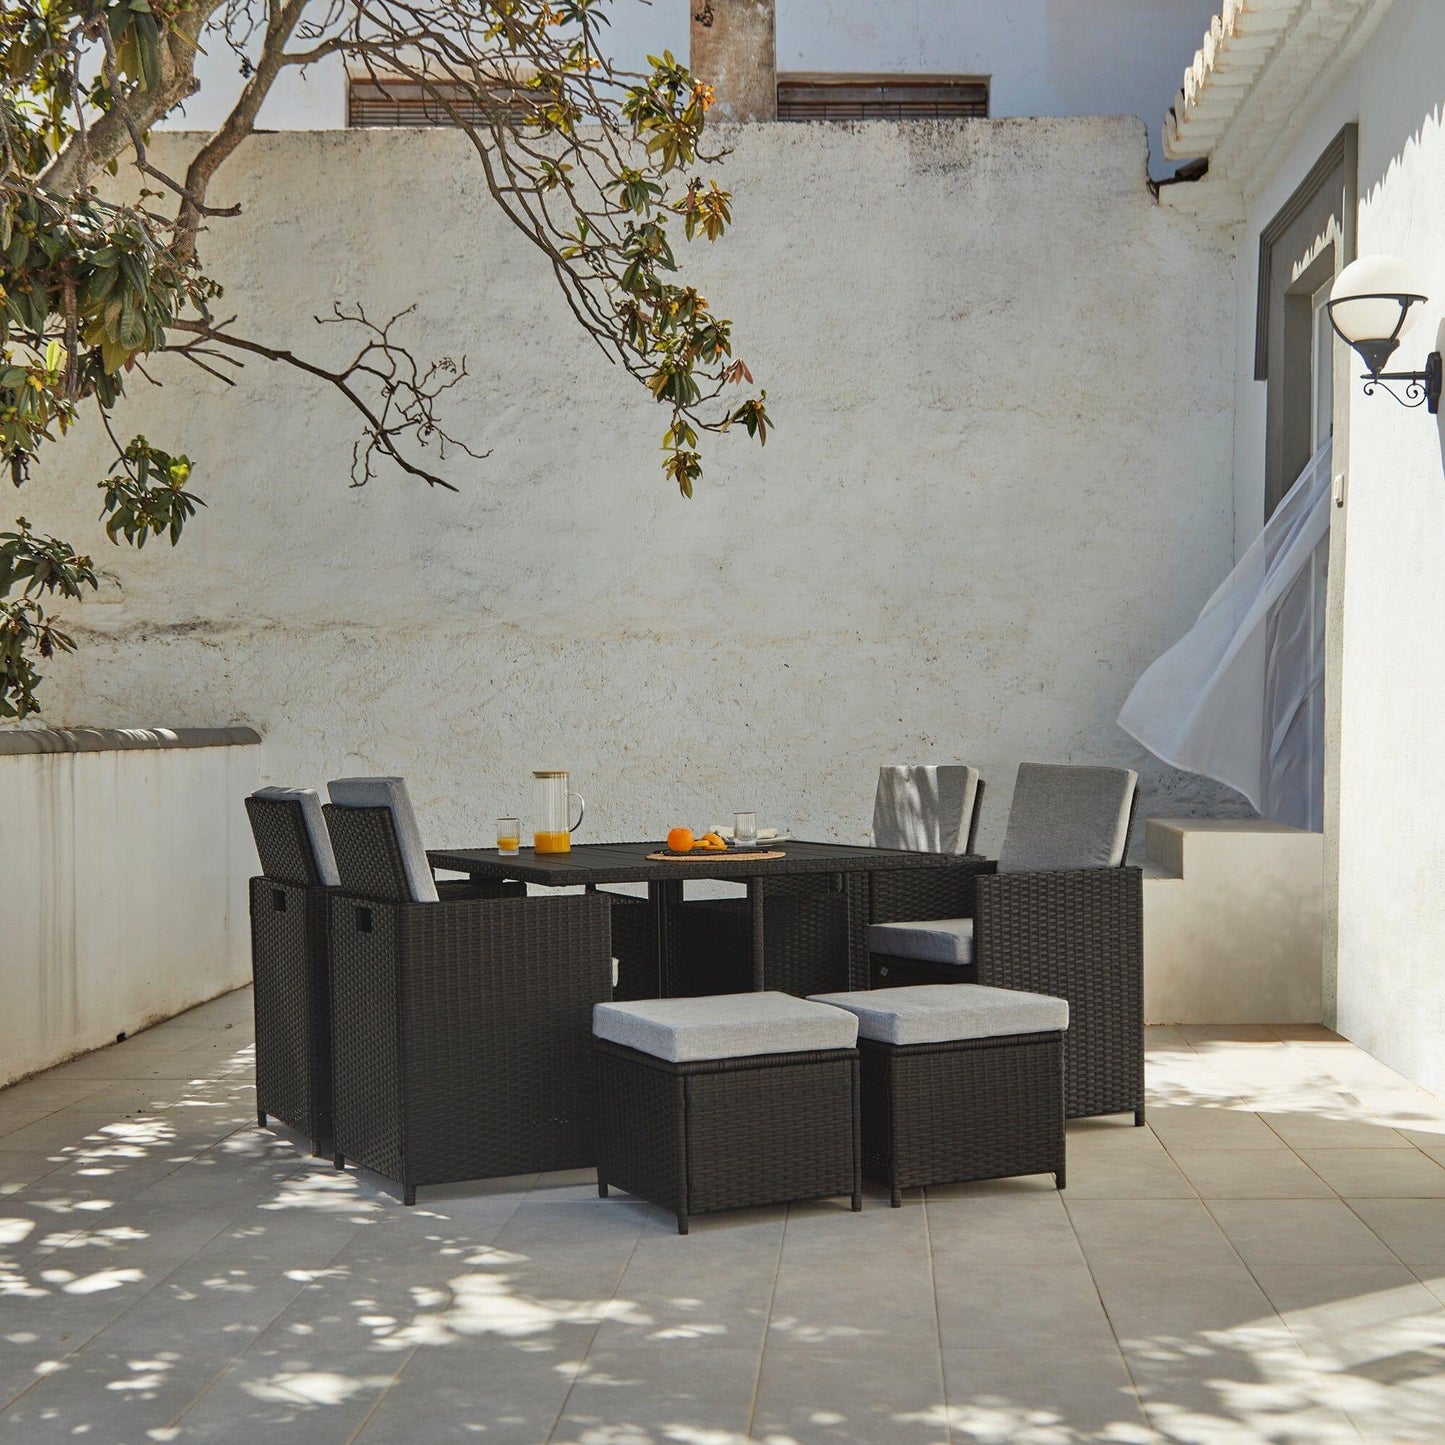 8 Seater Rattan Cube Outdoor Dining Set - Black Weave Polywood Top - Laura James